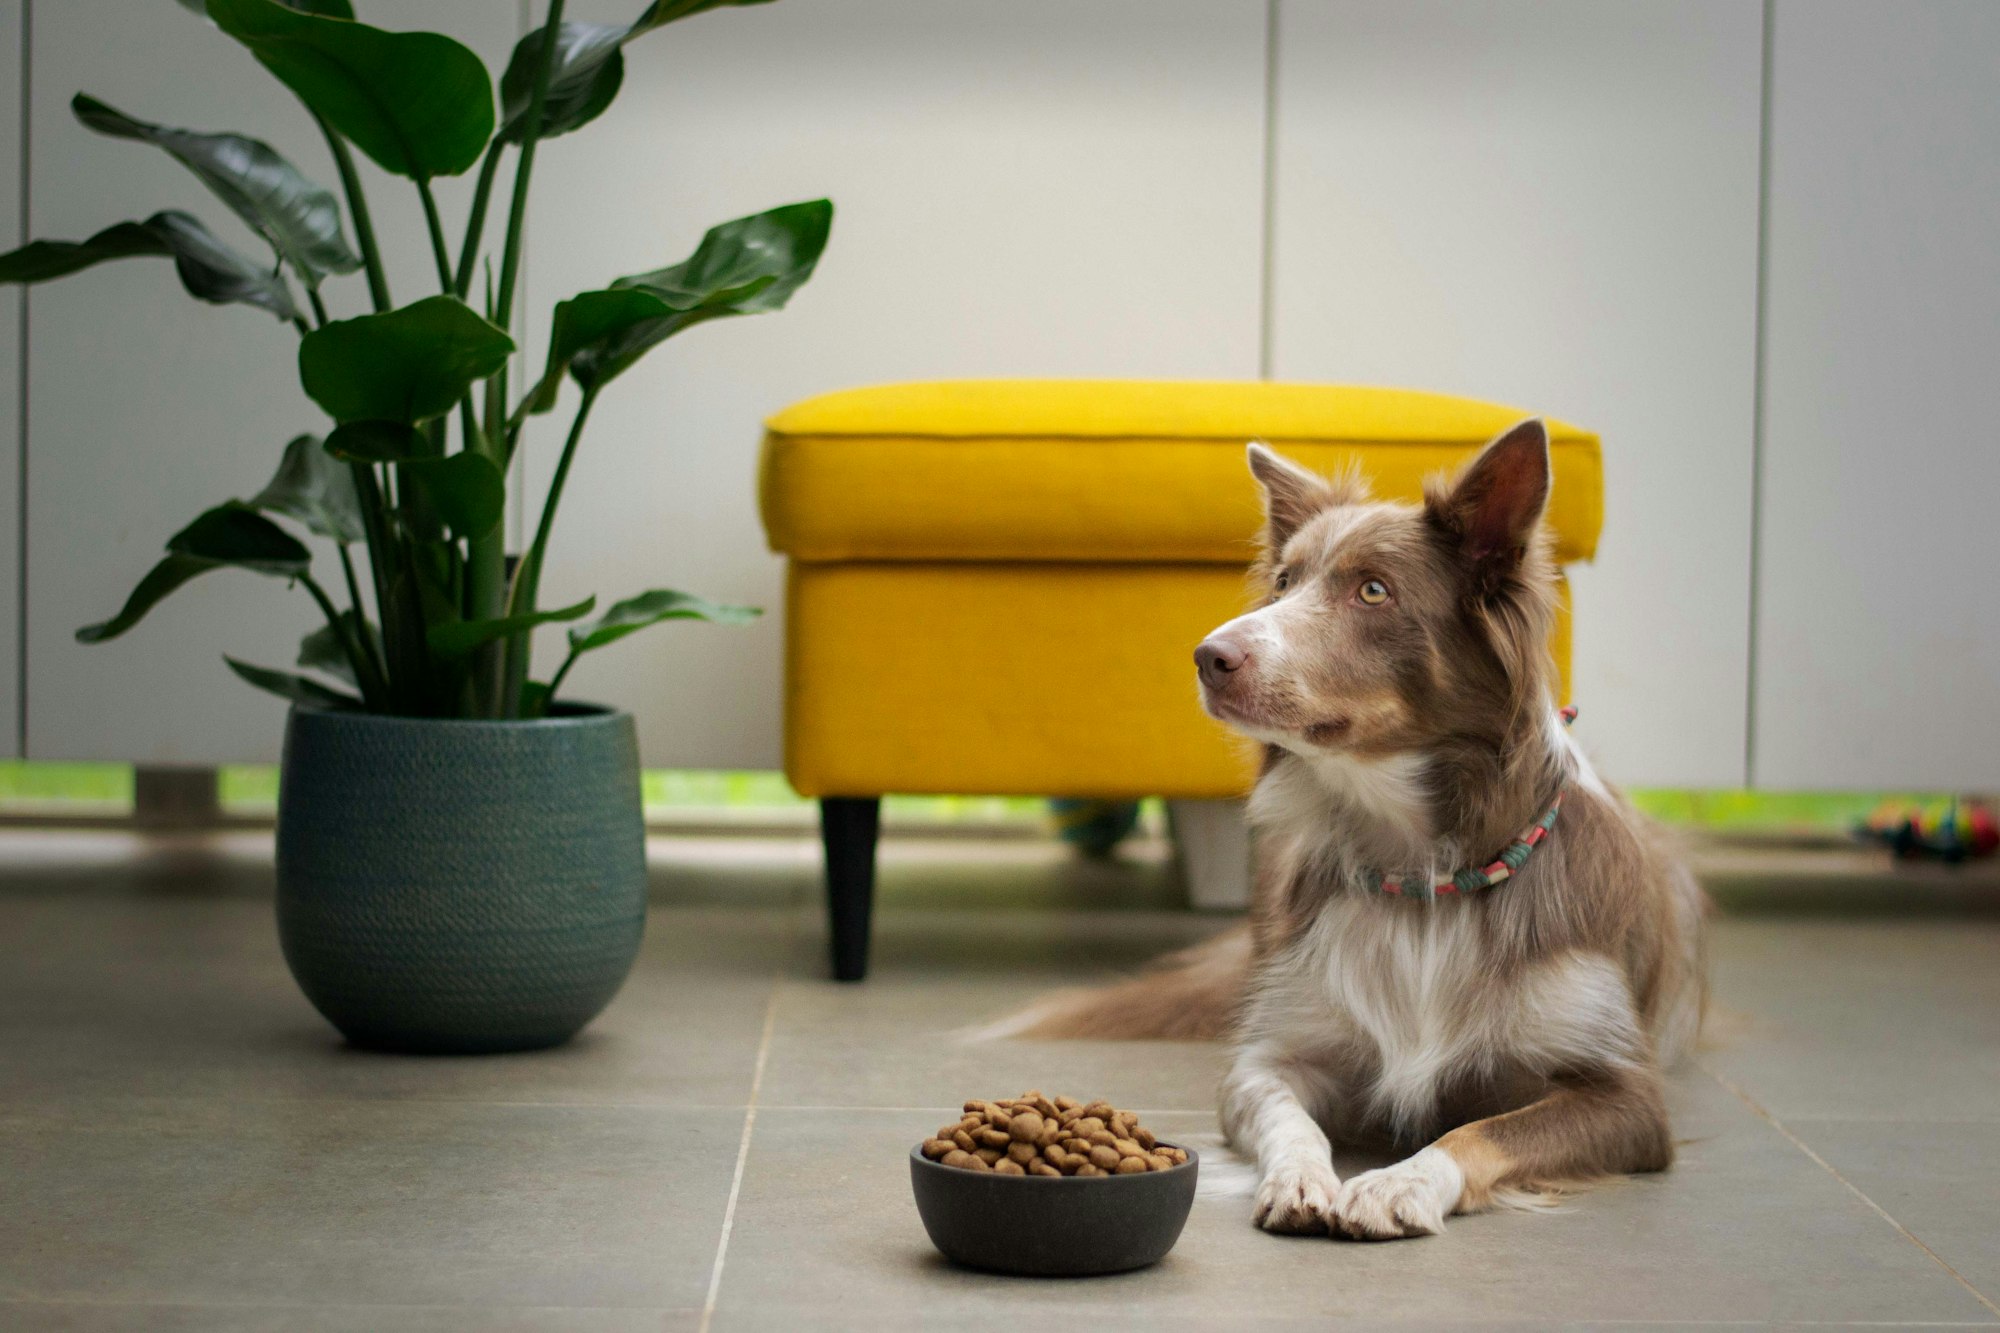 How to soften dog food